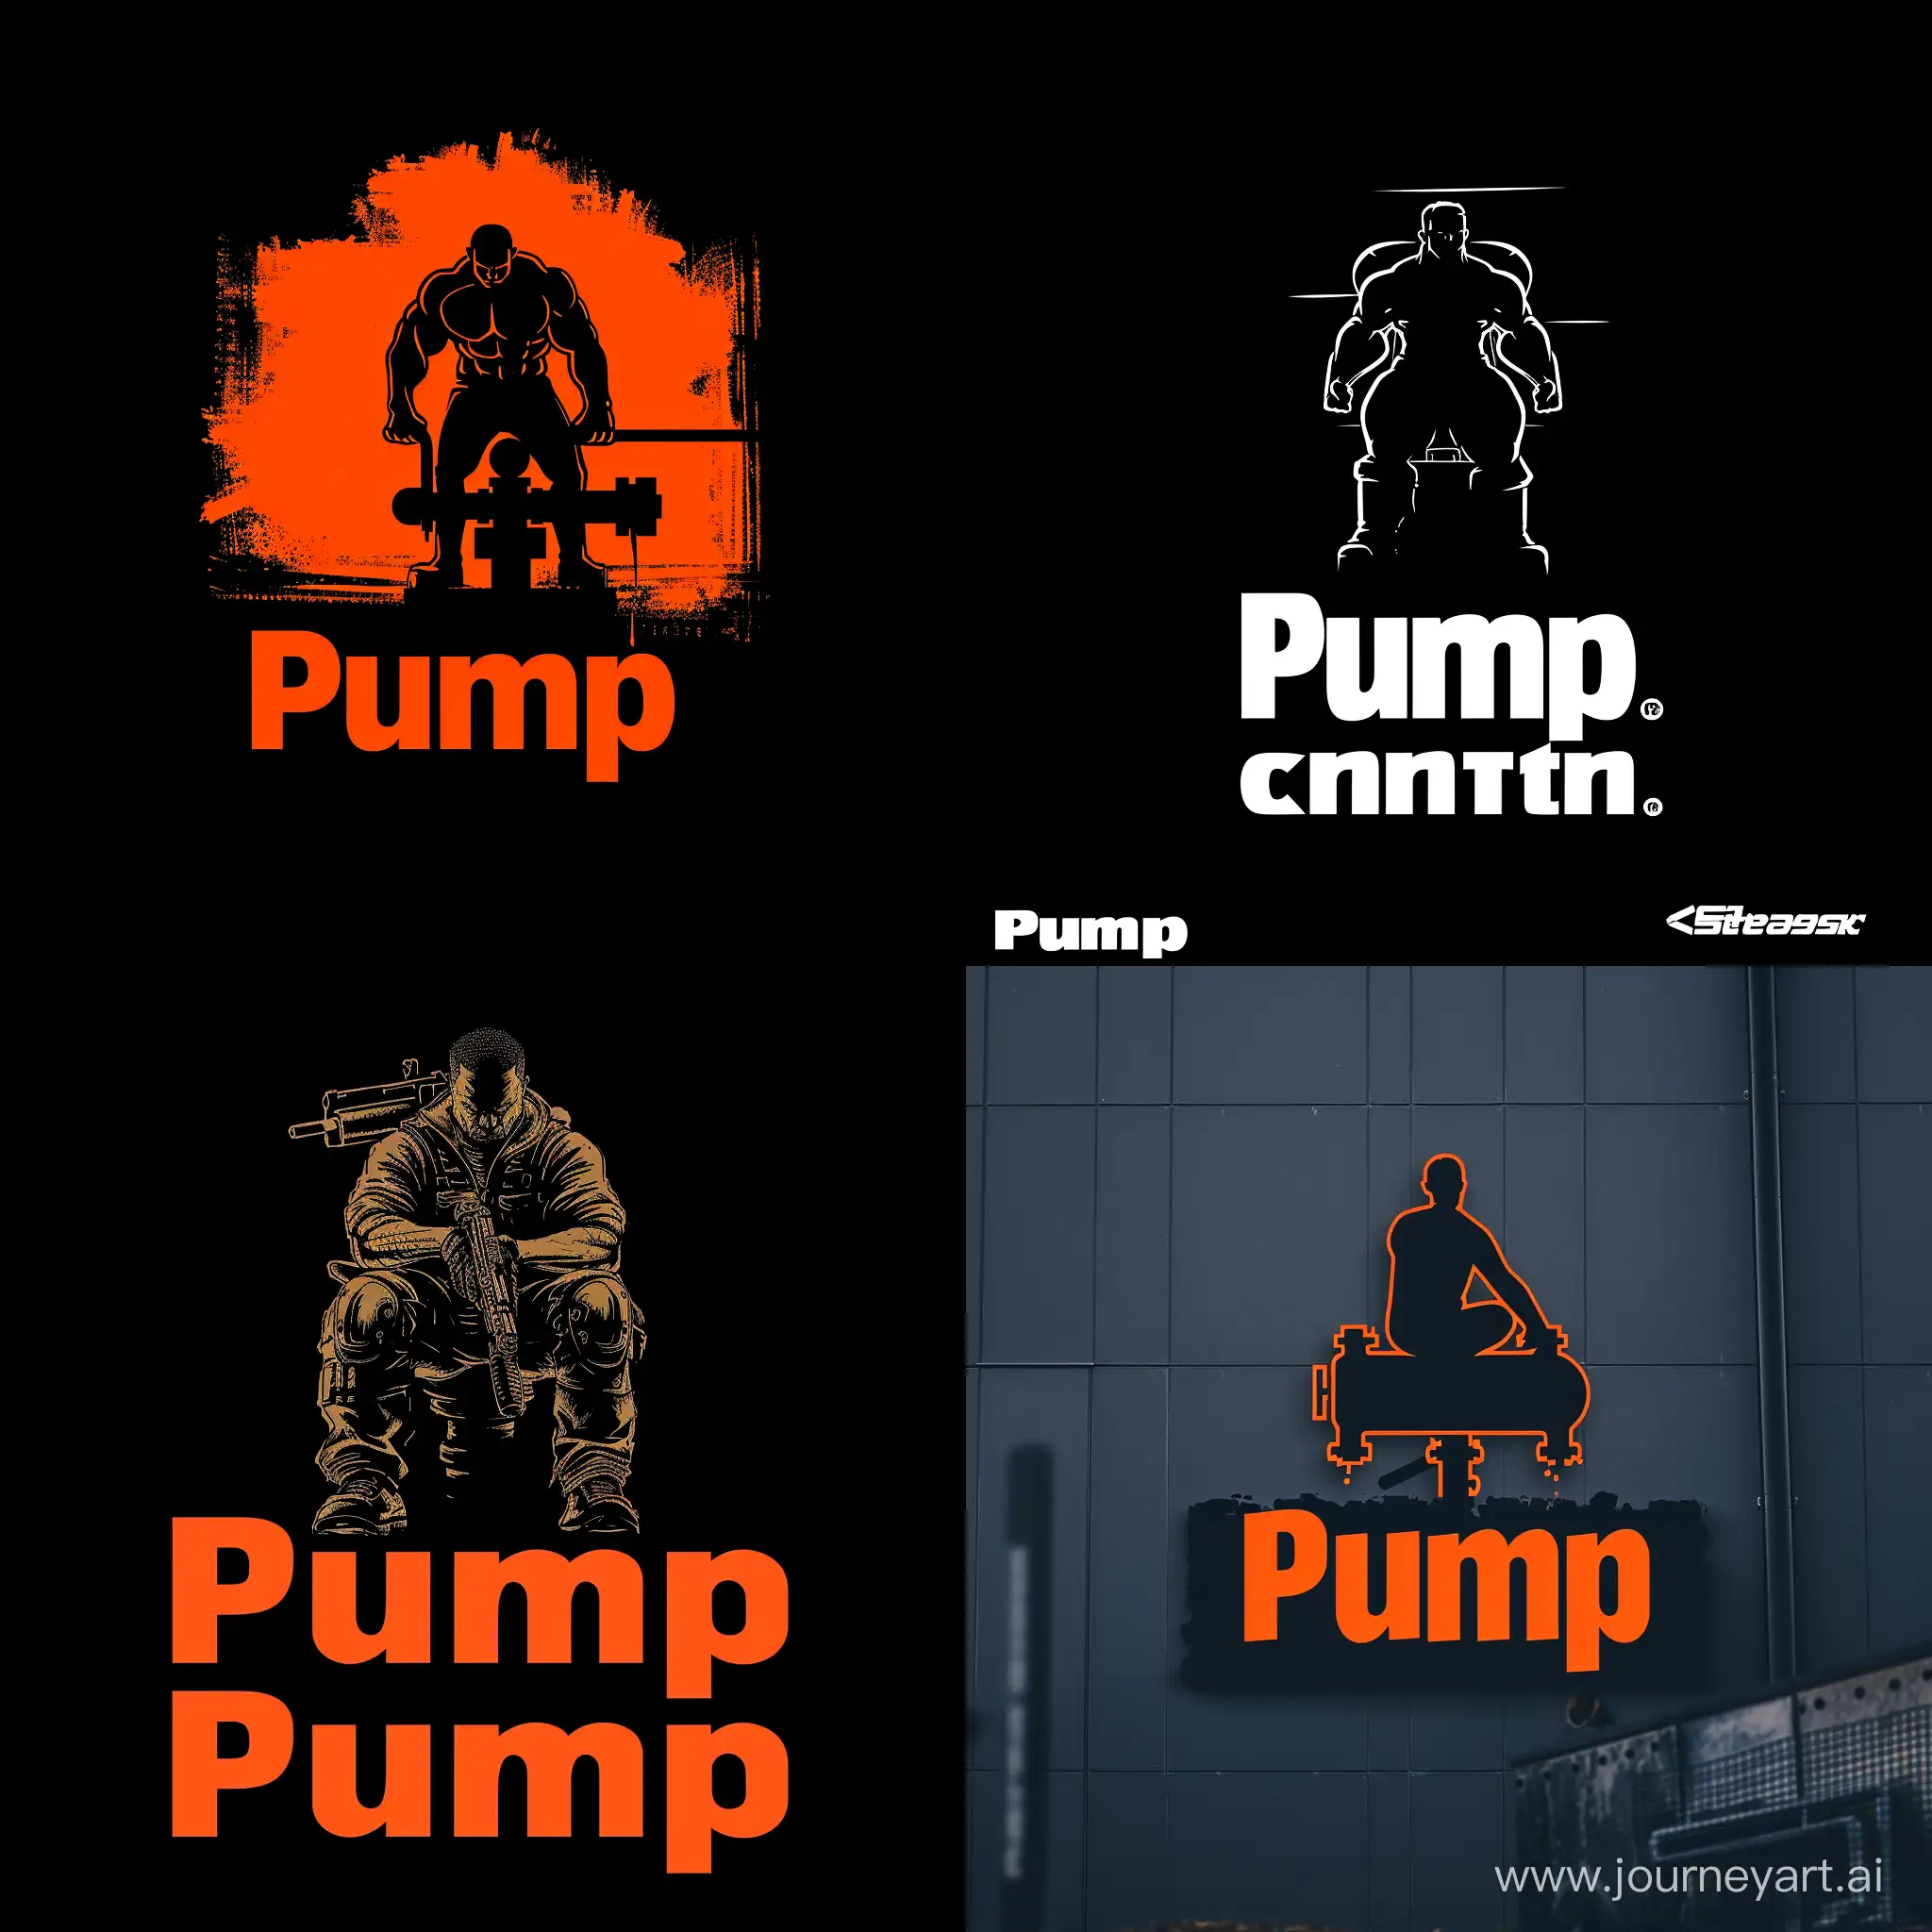 You do logo with man before, can you regenerate it and make “Pump” central 